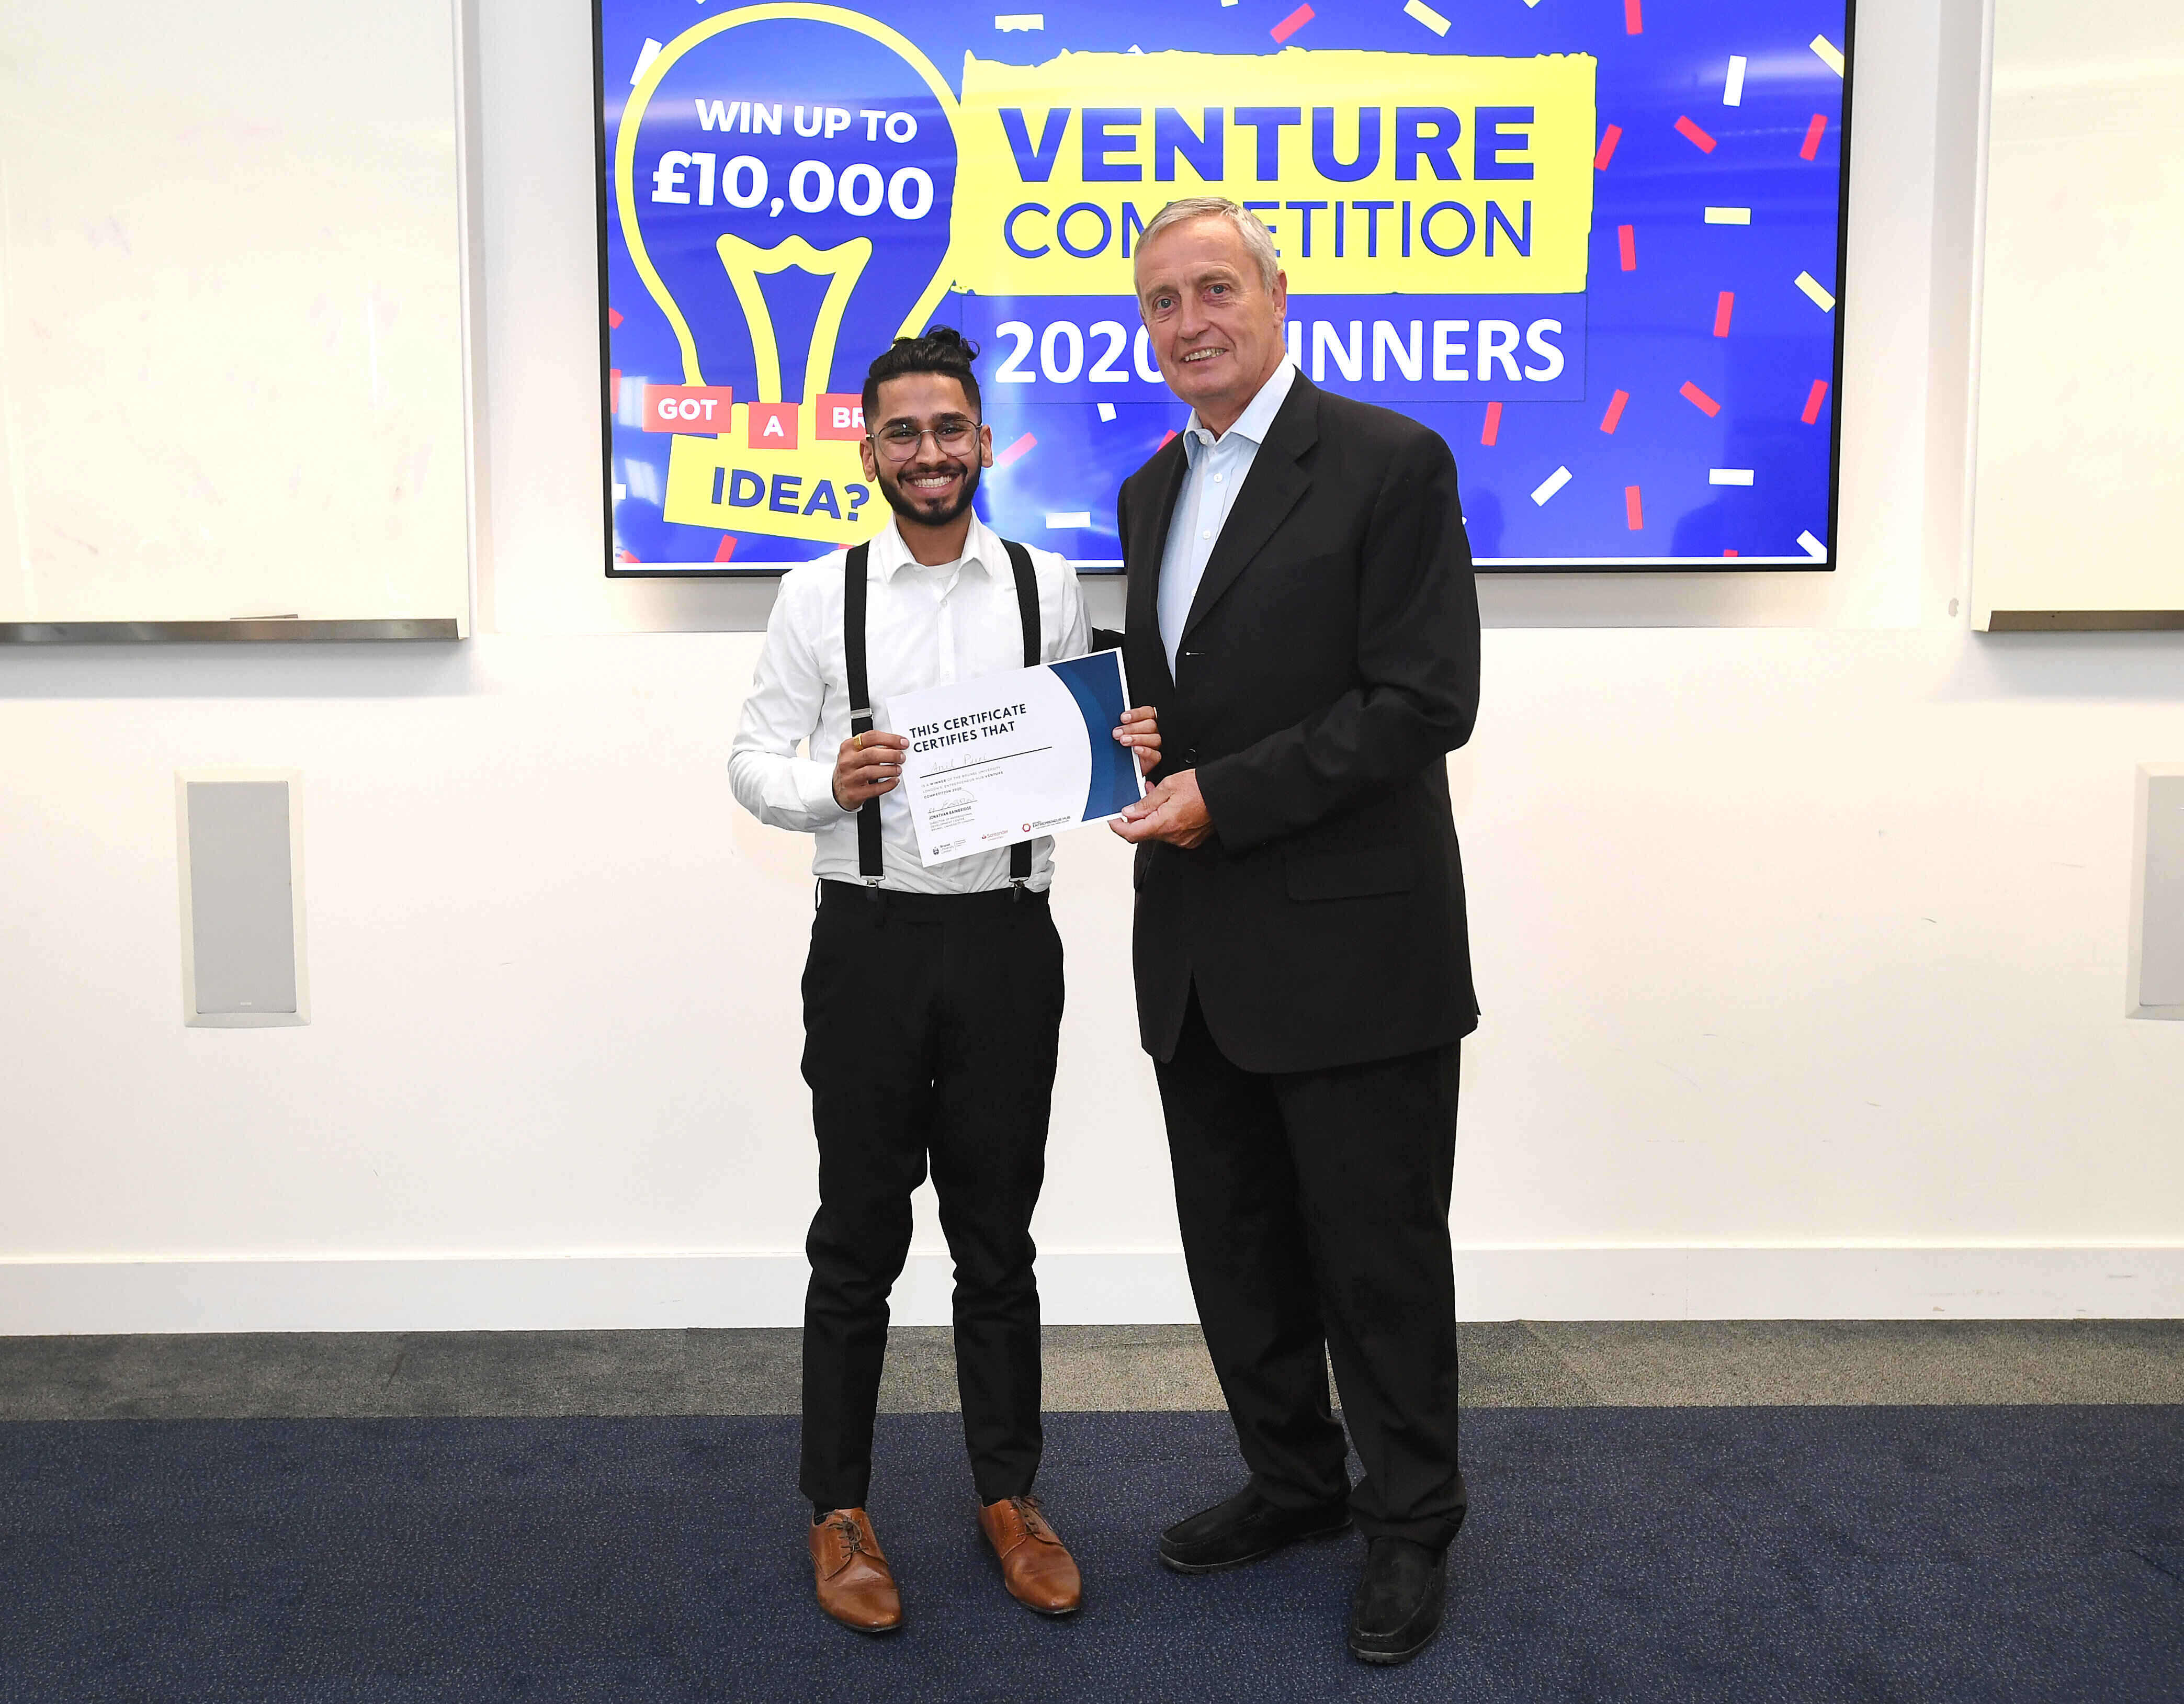 ANIL - VENTURE COMPETITION 2020